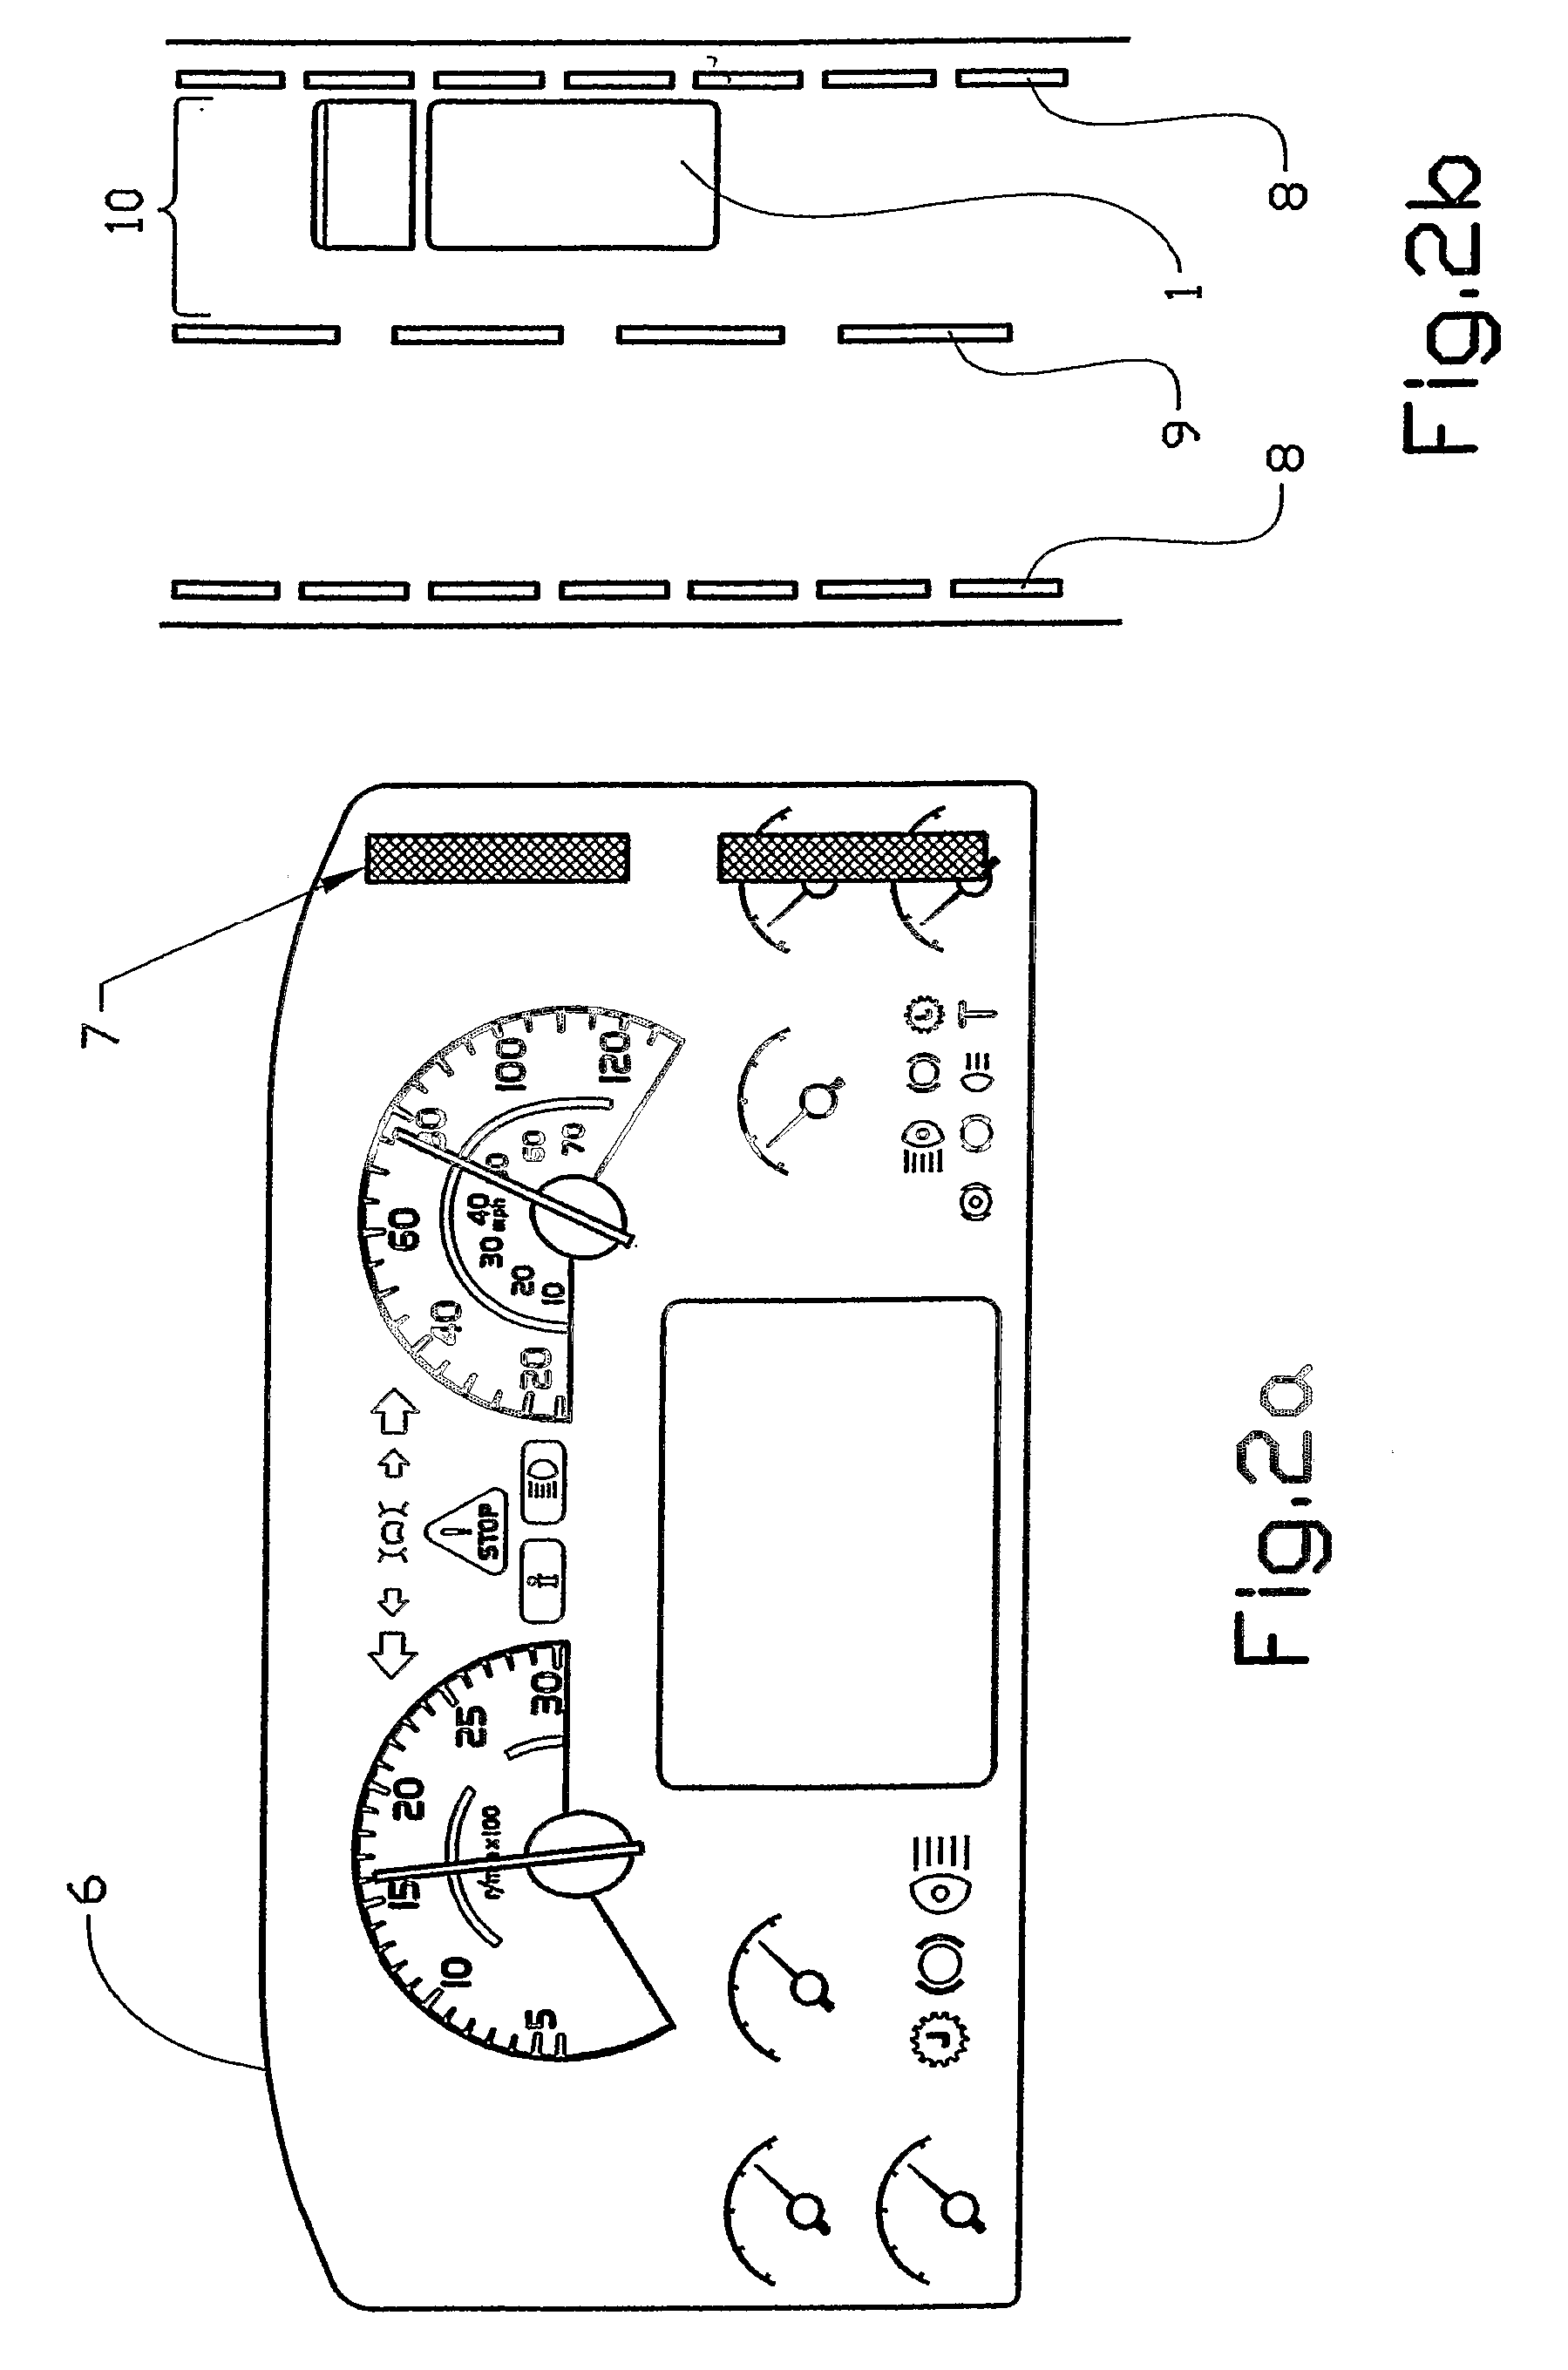 Apparatus and method for alerting a driver when a vehicle departs from a predefined driving area in a lane